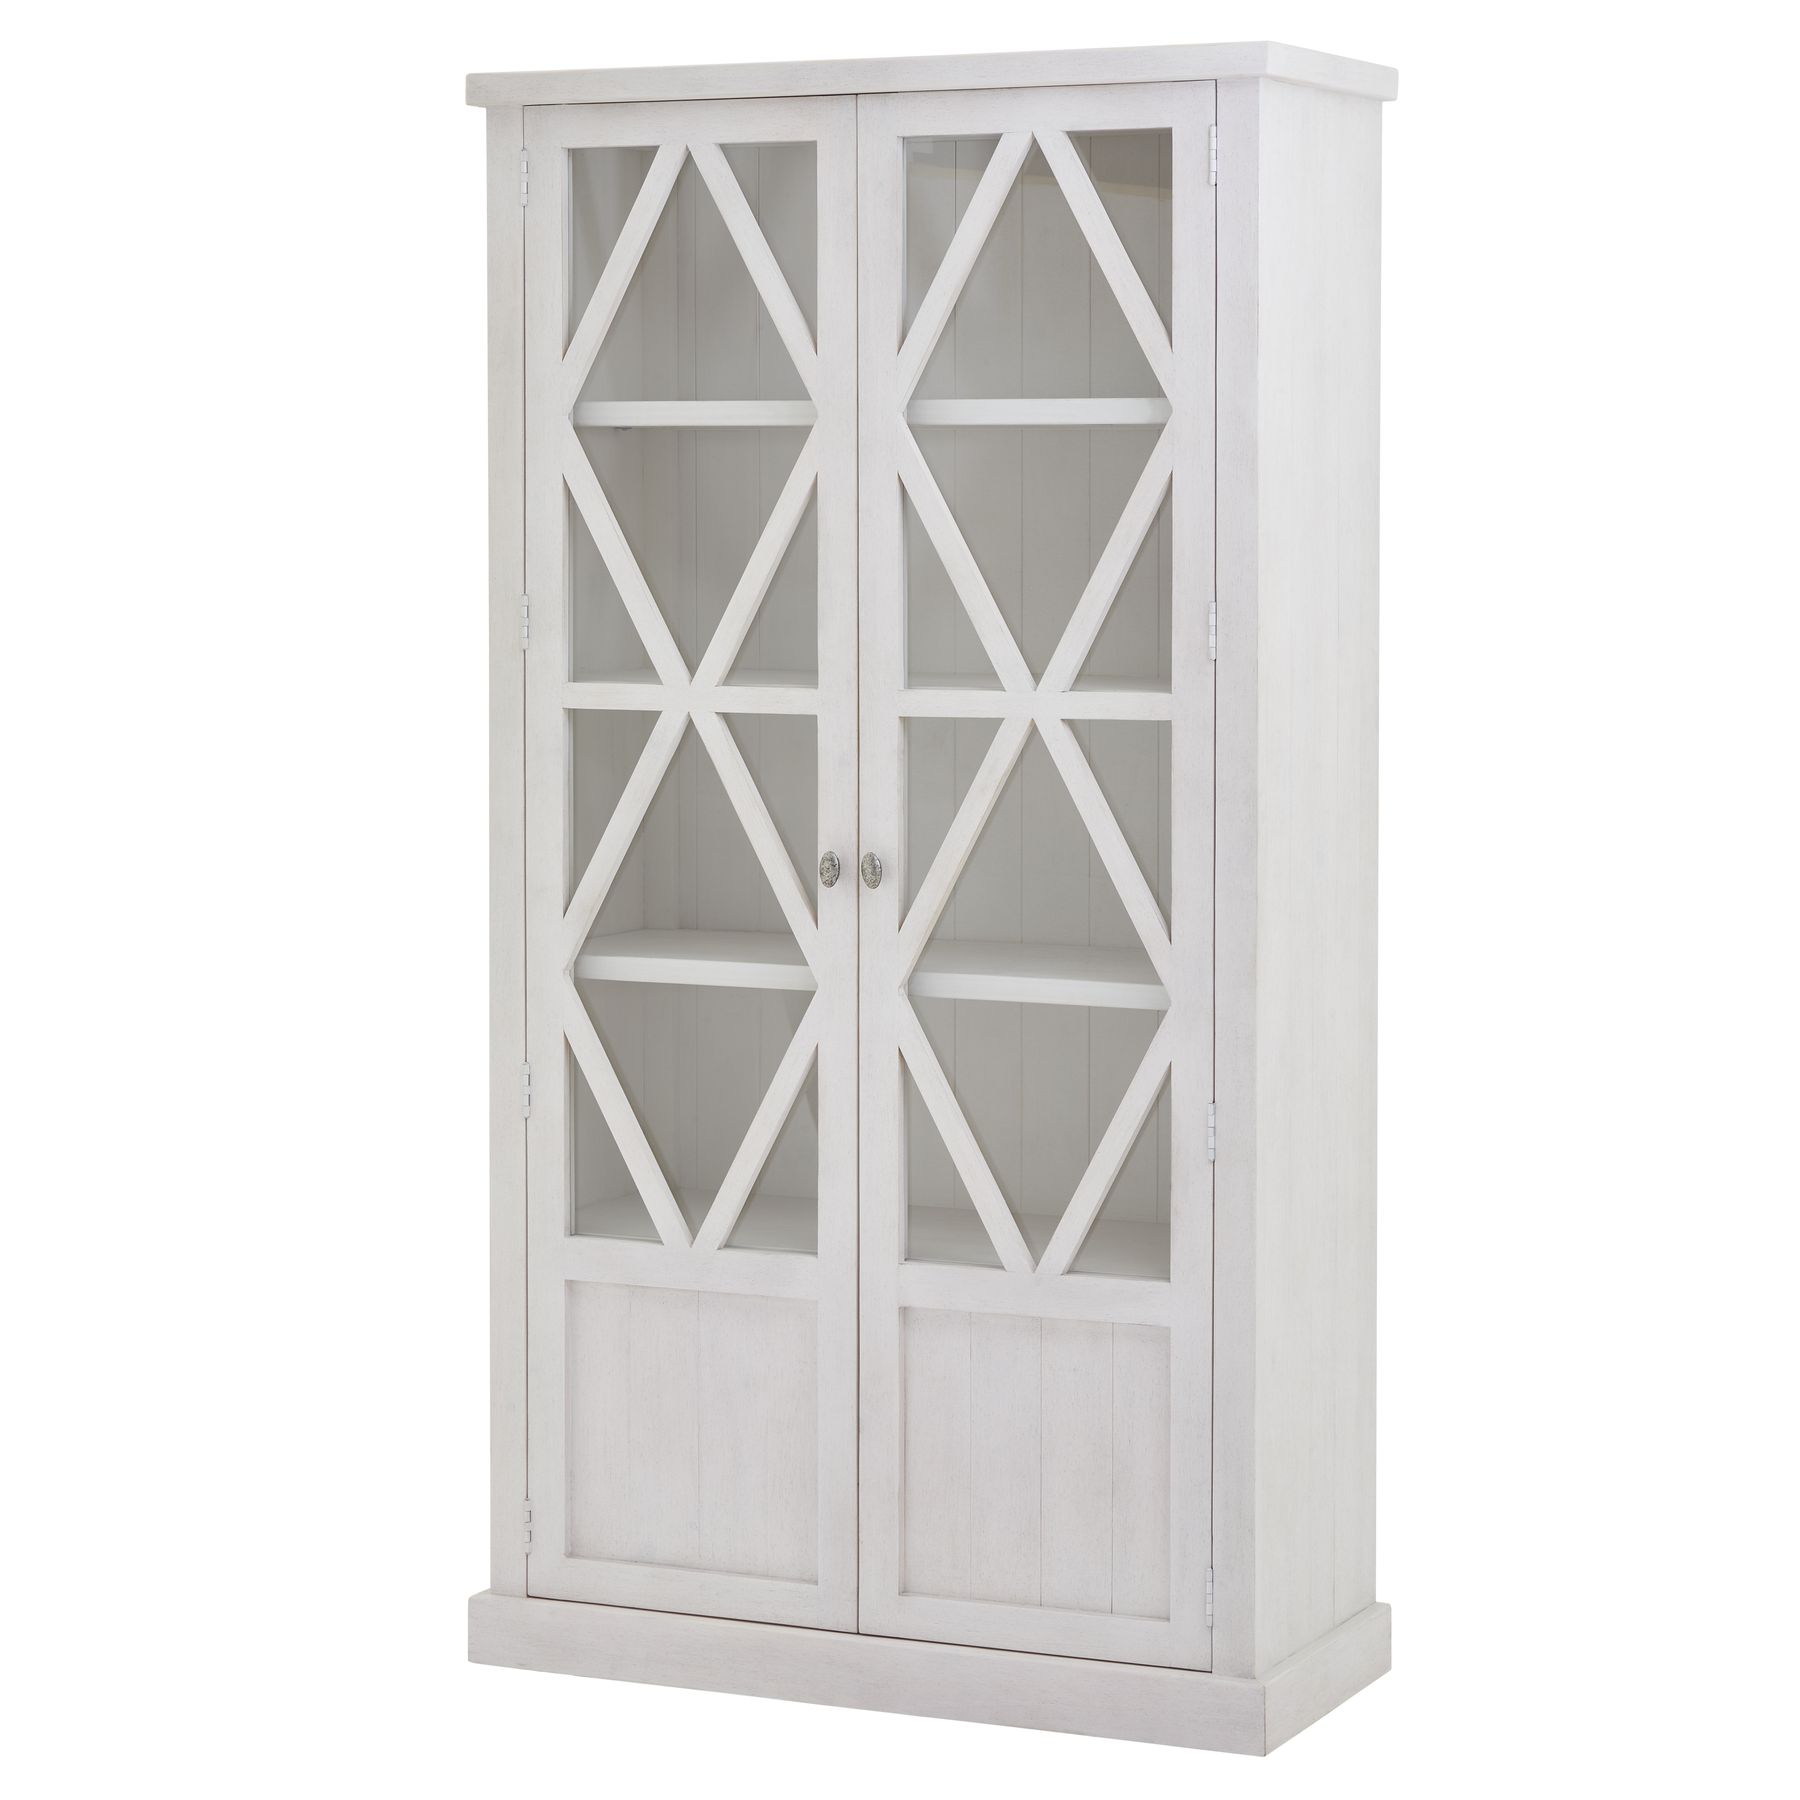 Stamford Plank Collection Tall Display Cabinet - Image 1